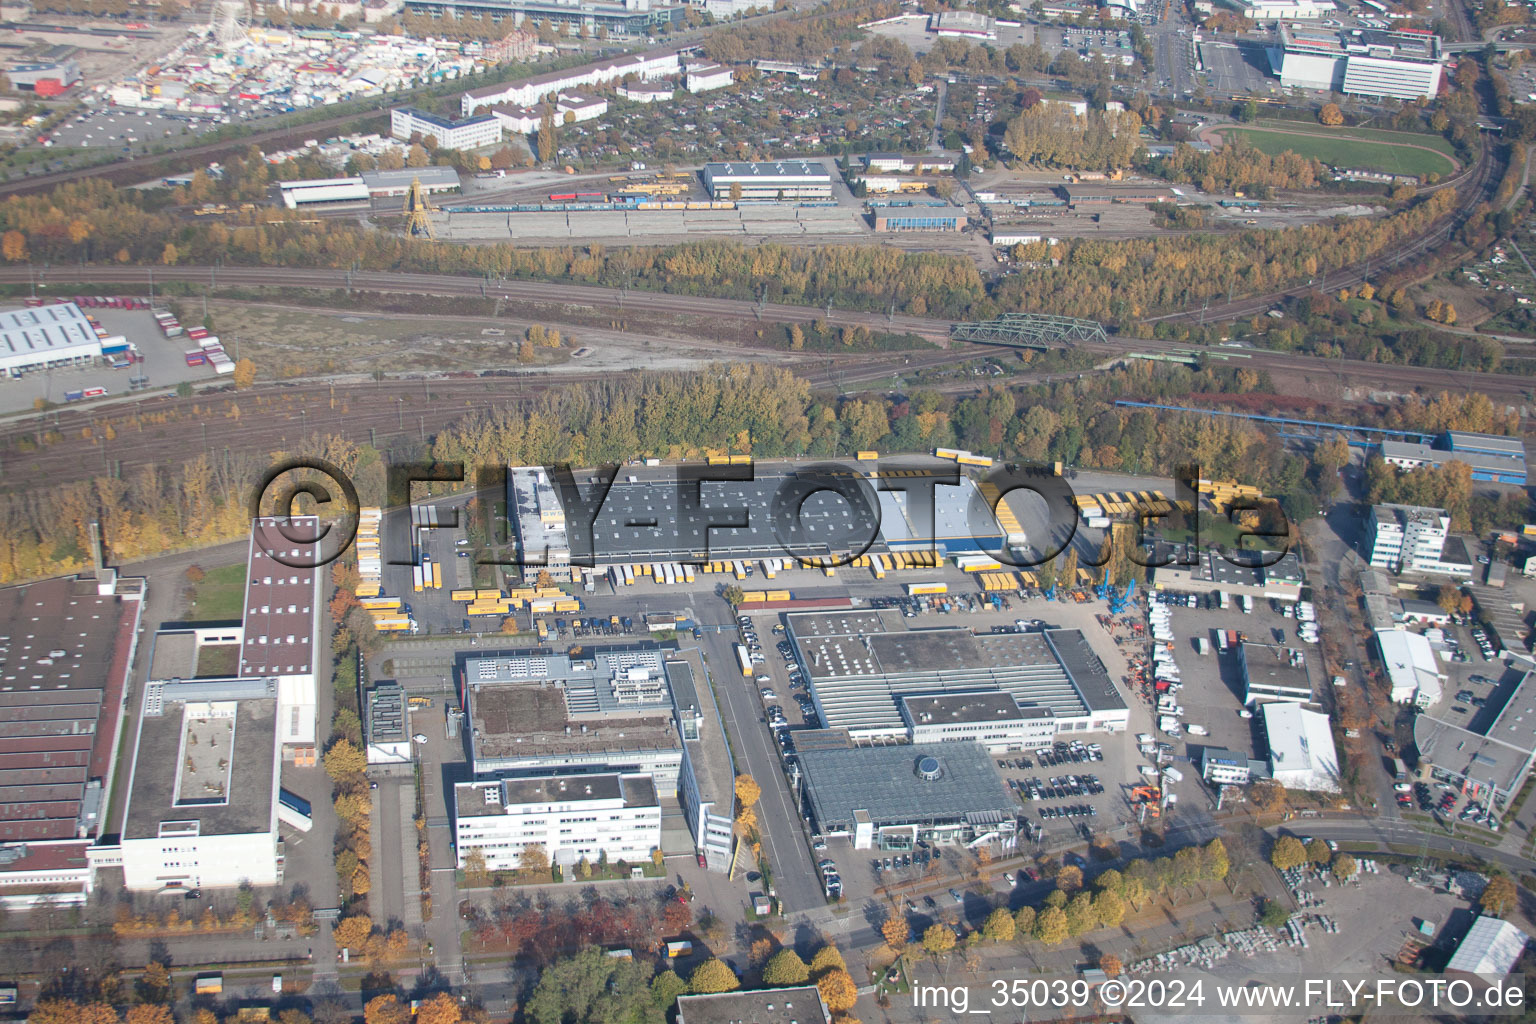 Warehouses and forwarding building SWS-Speditions-GmbH, Otto-street in the district Durlach in Karlsruhe in the state Baden-Wurttemberg seen from above